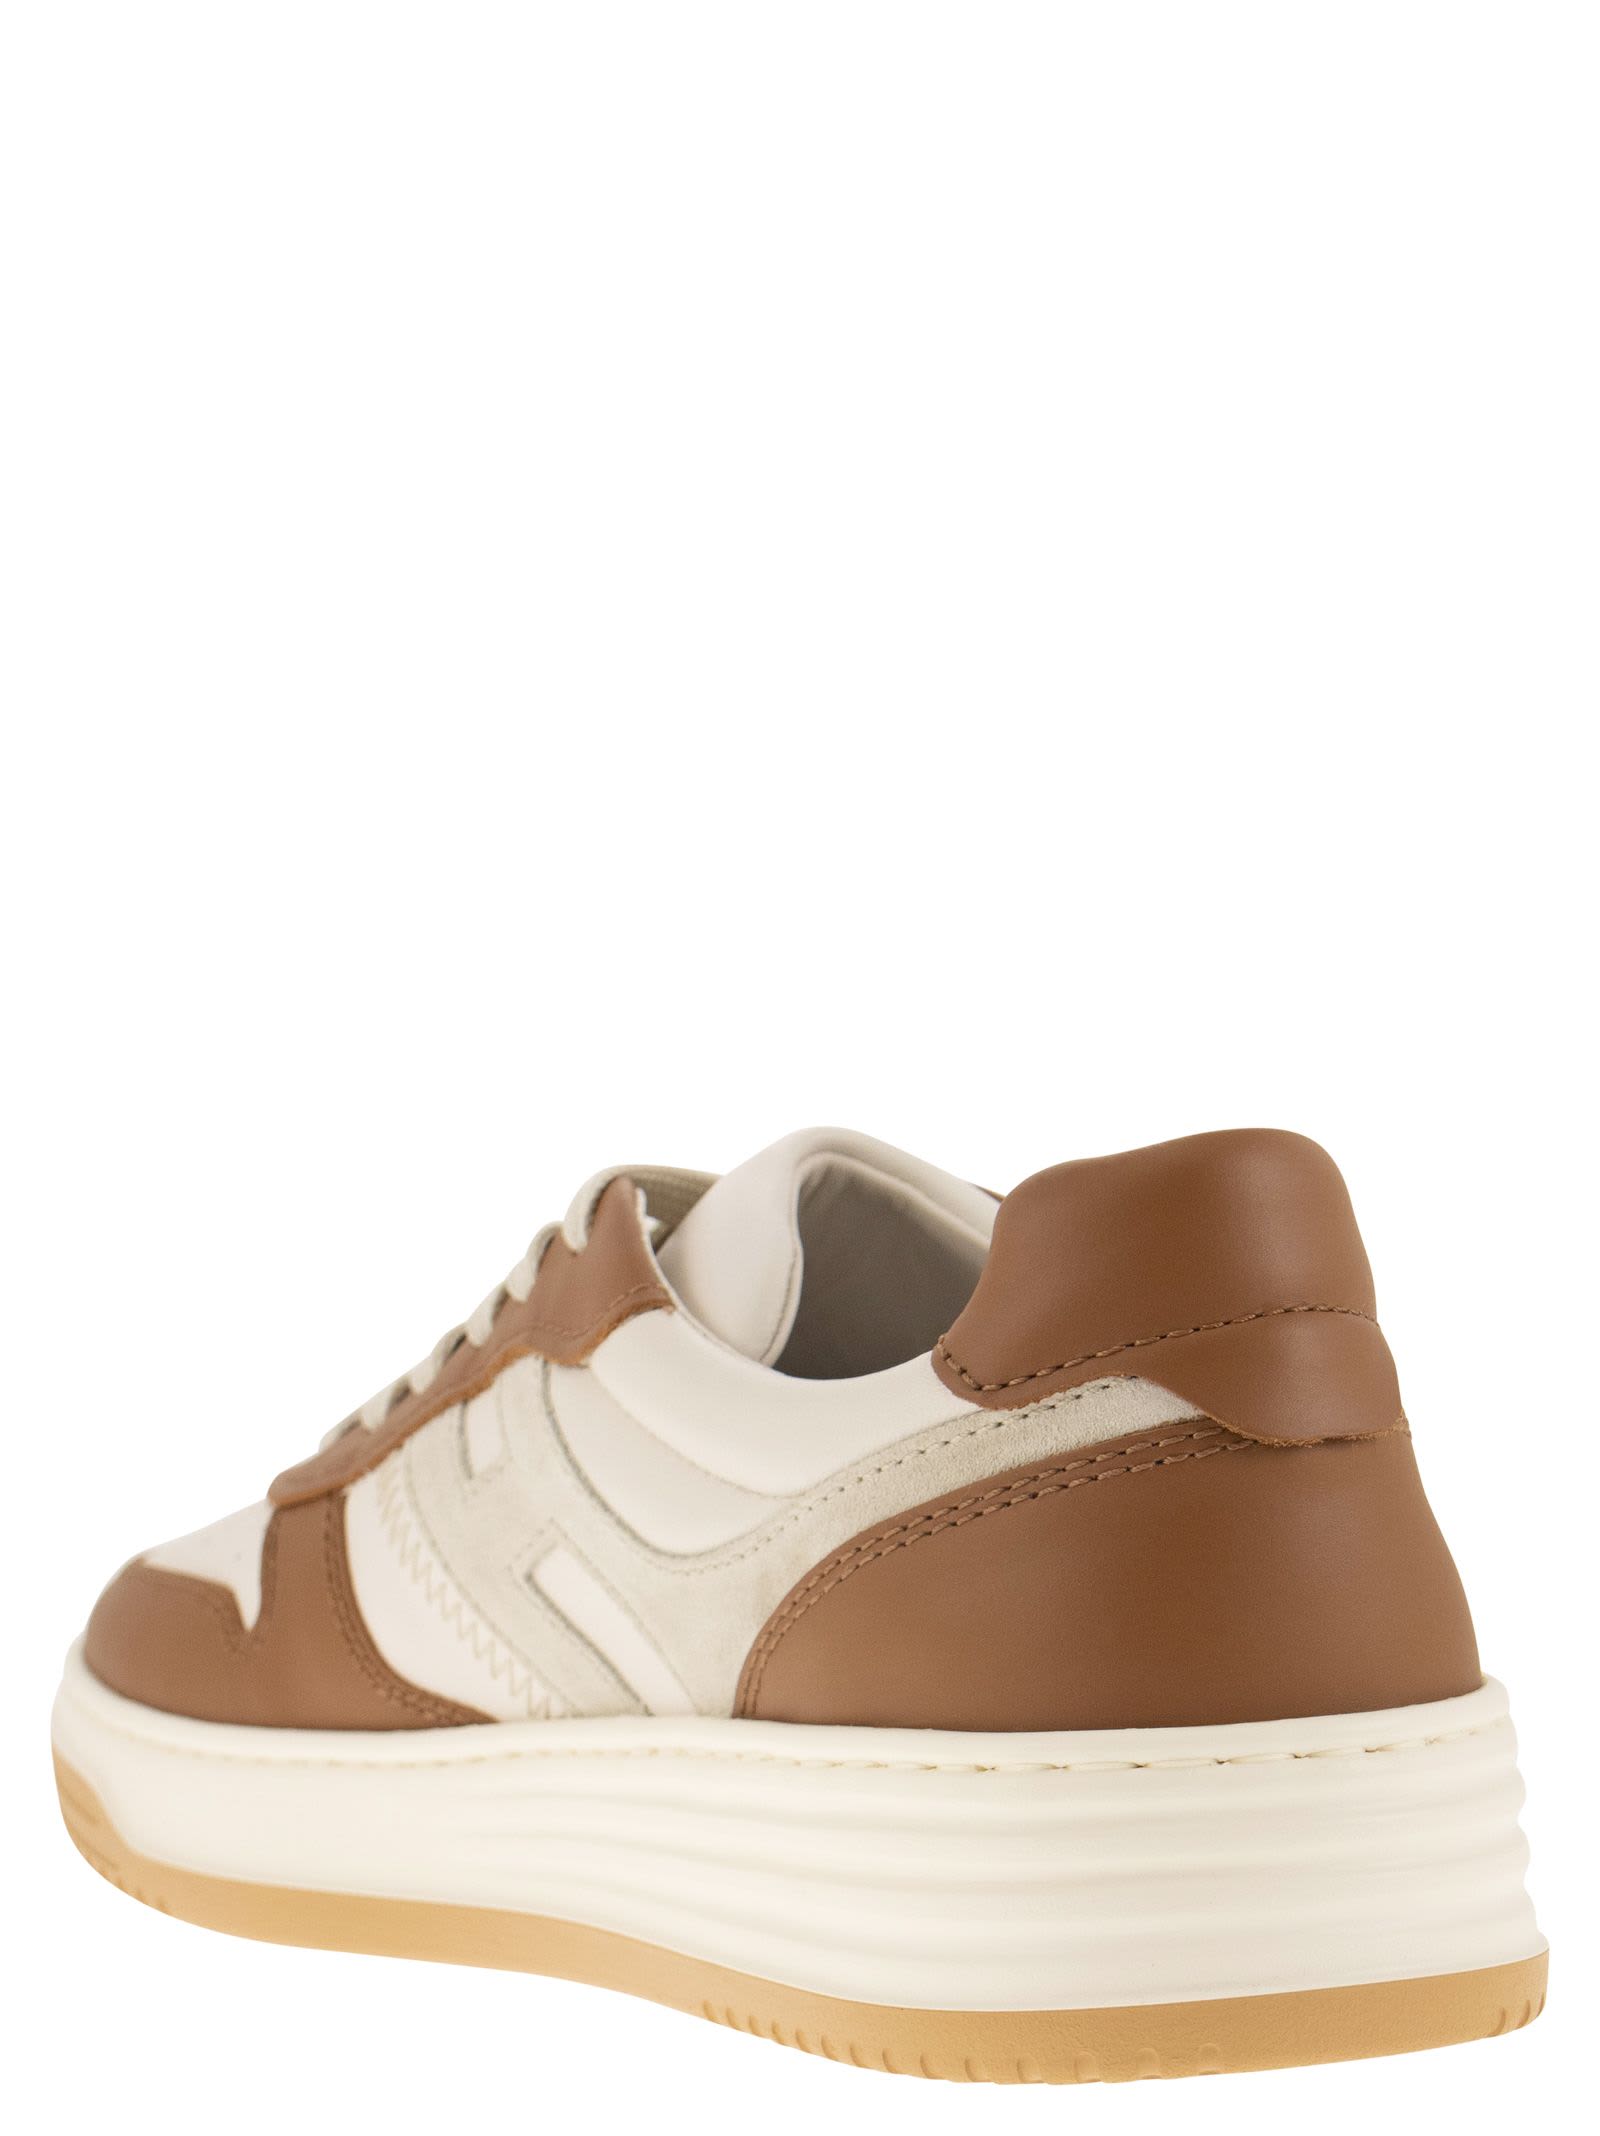 Shop Hogan H630 Leather Sneakers In J